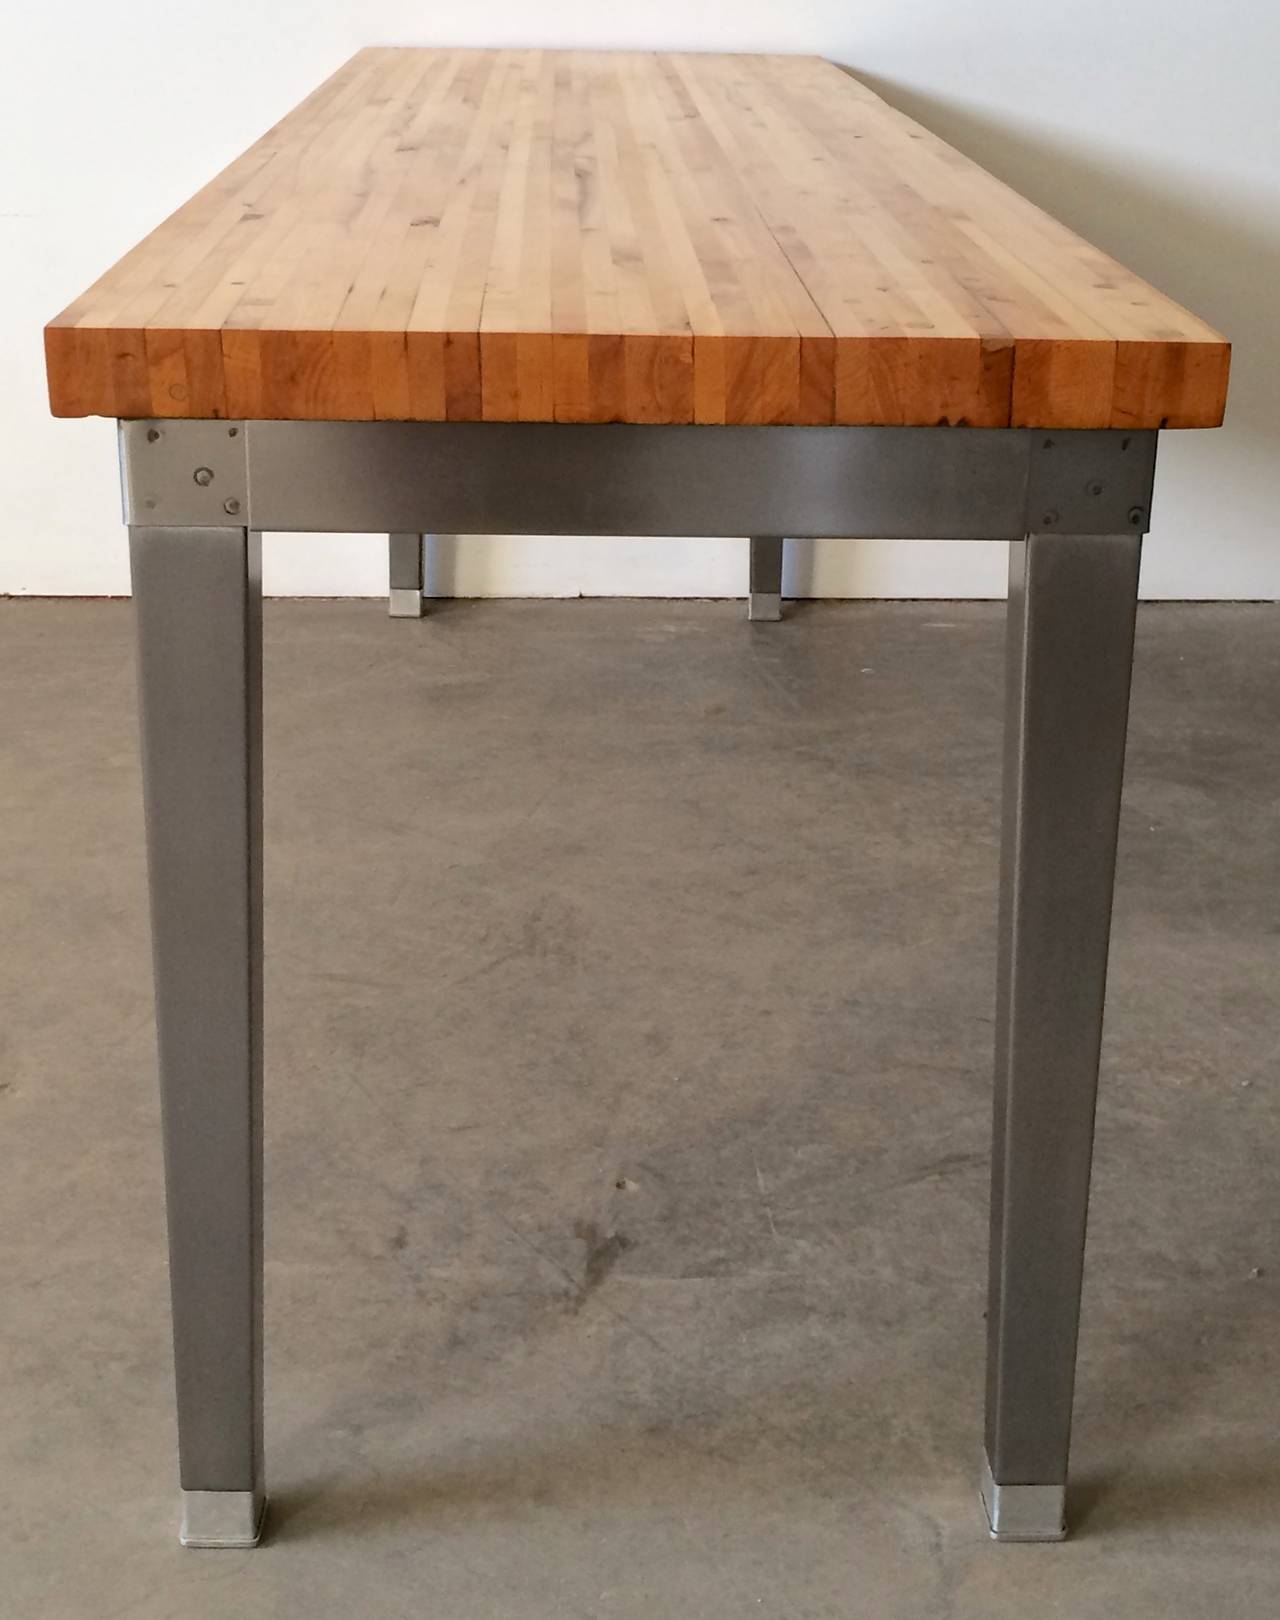 A vintage Industrial style maple butcher block table with metal legs. Completely restored and ready for a variety of uses. It works well as a serving or console table, a work table, desk or even a intimate dining table.